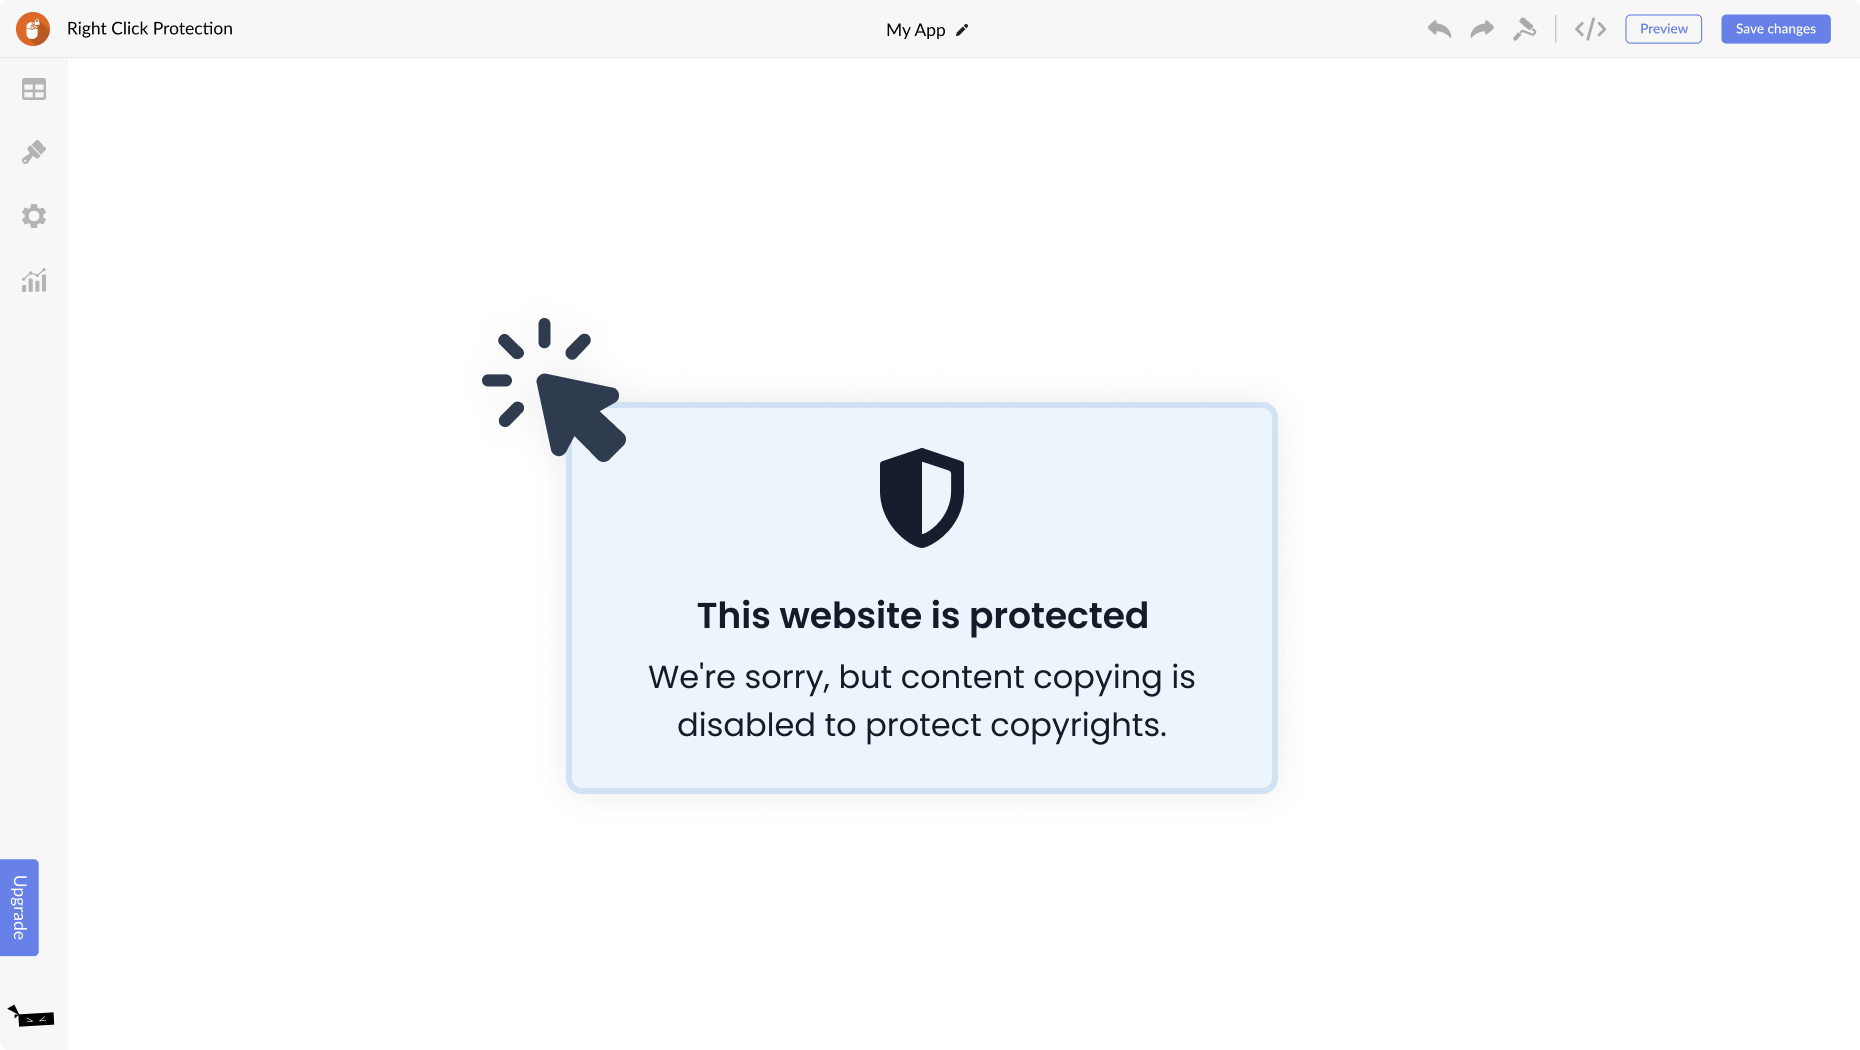 Right Click Protection for BigCommerce